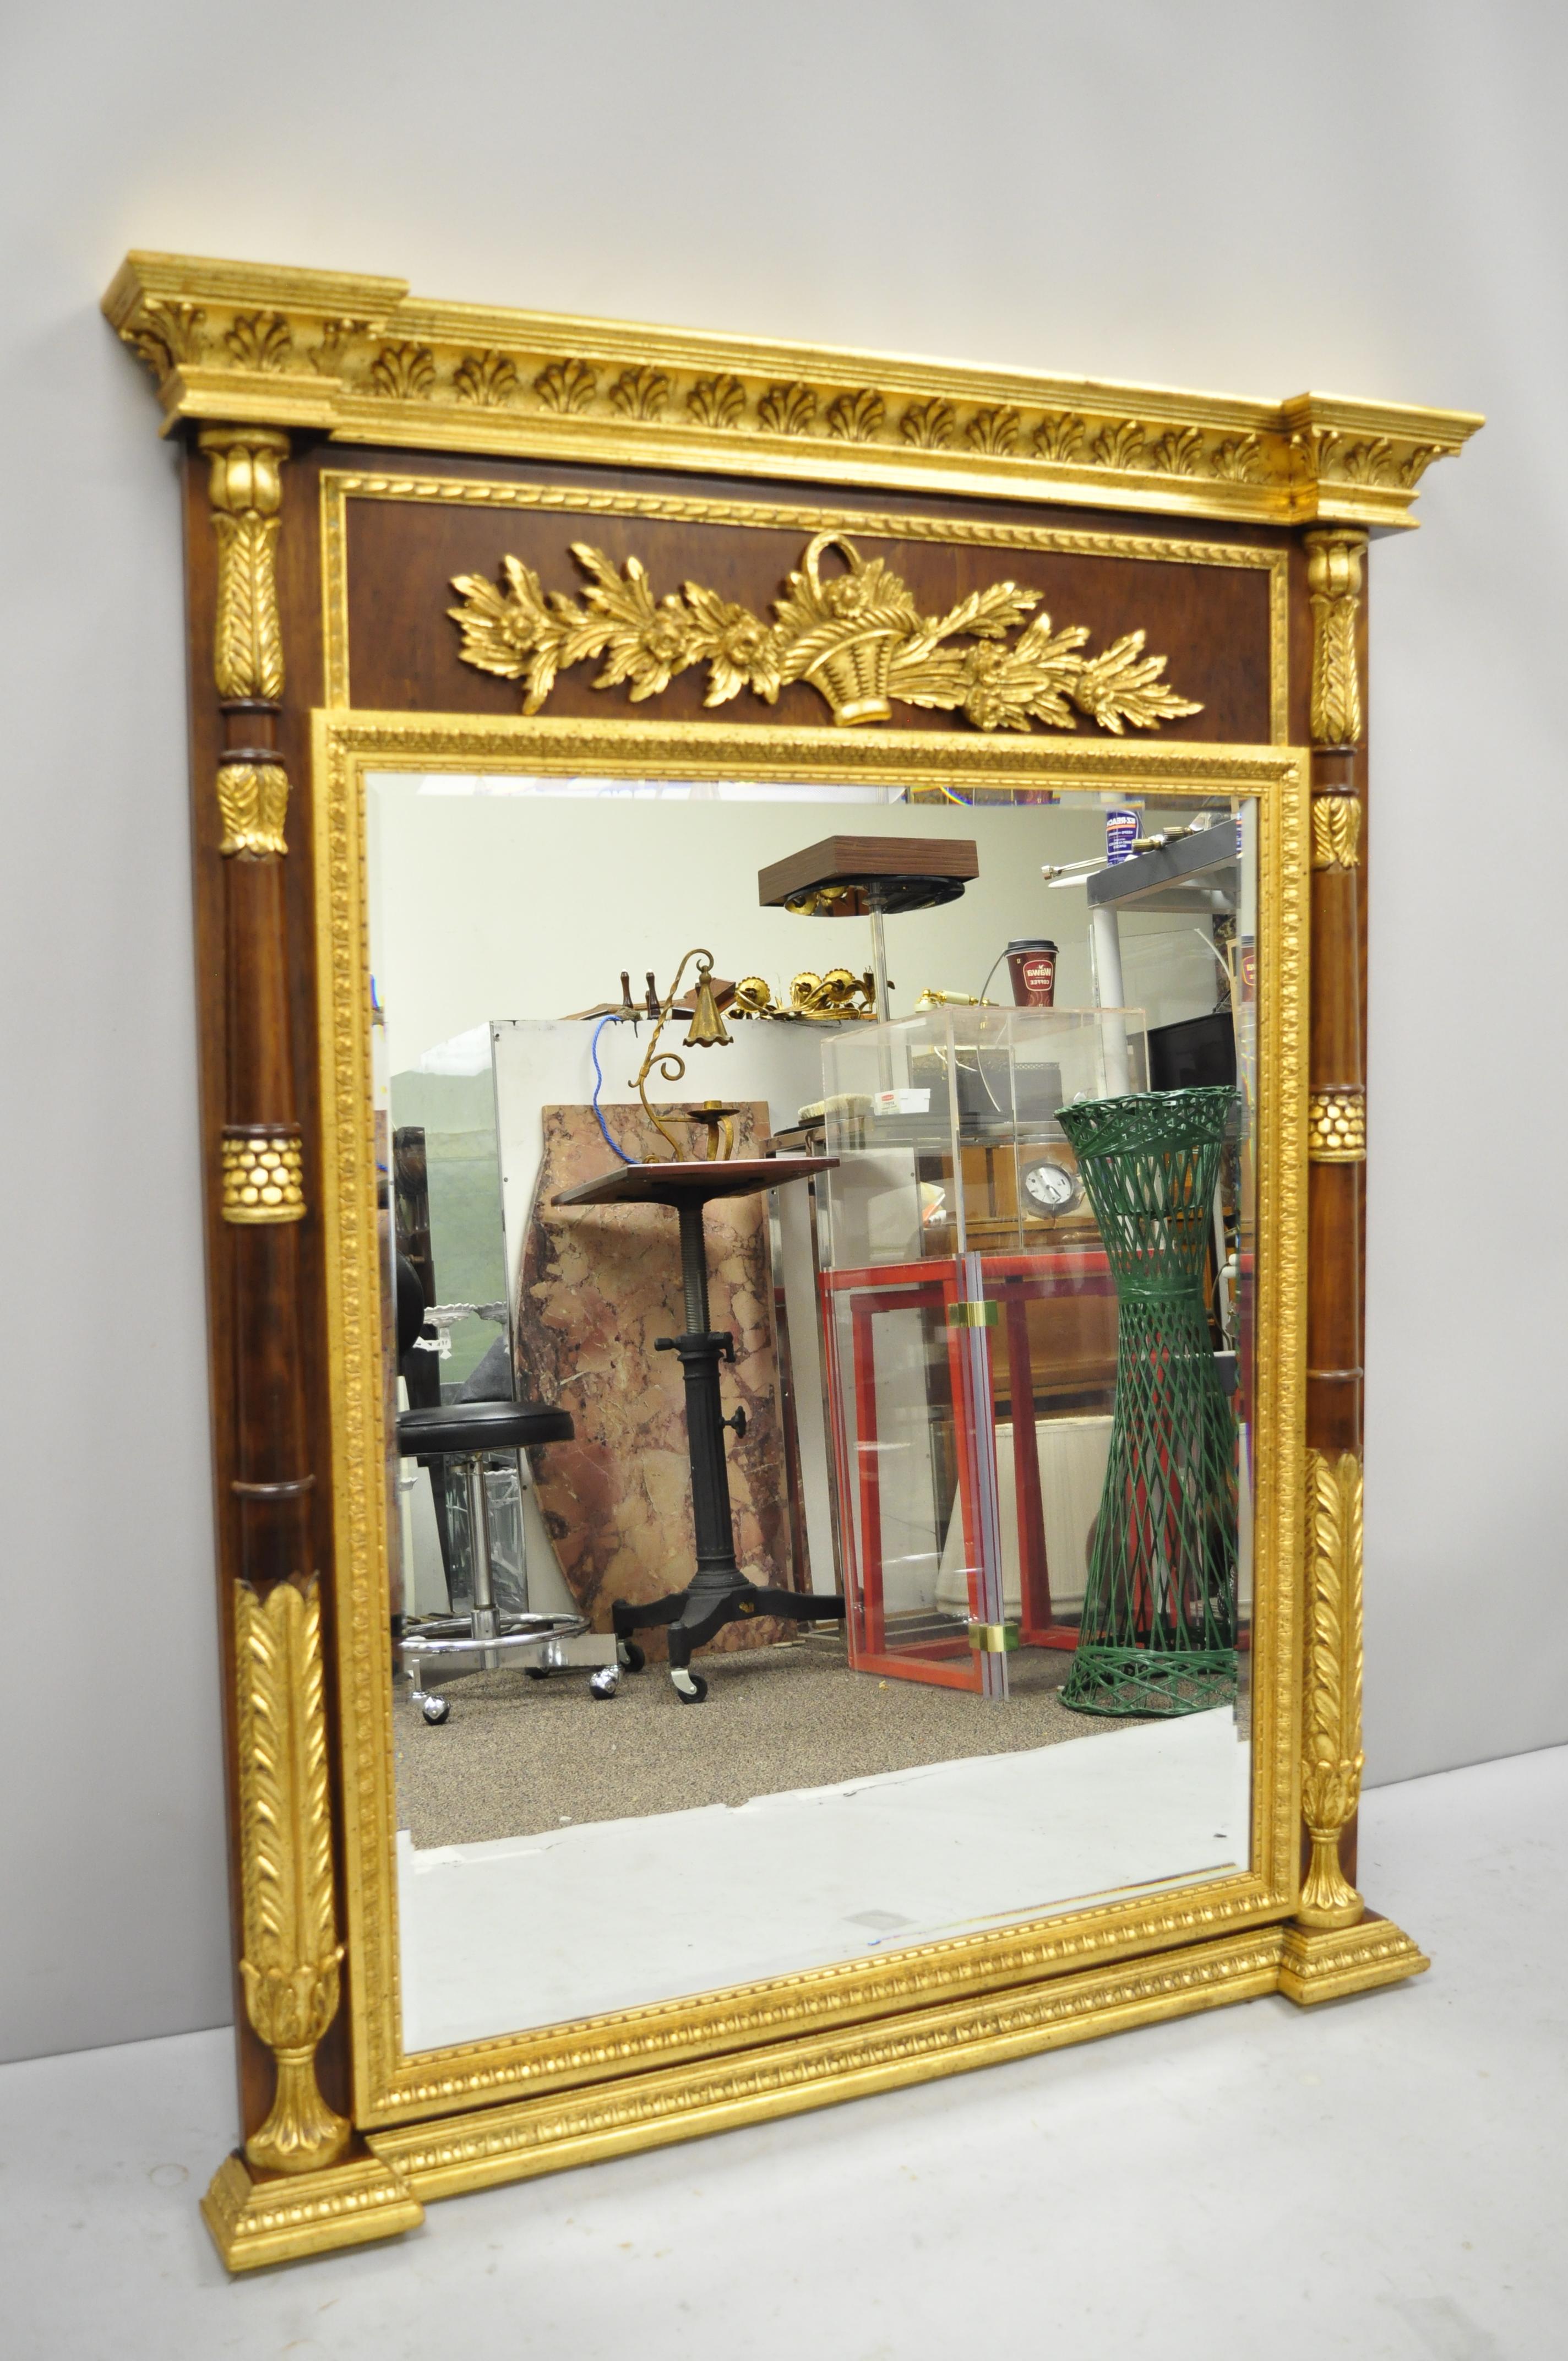 Vintage Labarge French Louis XV / XVI style gold gilt Italian console wall pier mirror. Item features gold gilt accent, solid wood frame, beautiful wood grain, nicely carved details, original label, beveled glass mirror, quality Italian